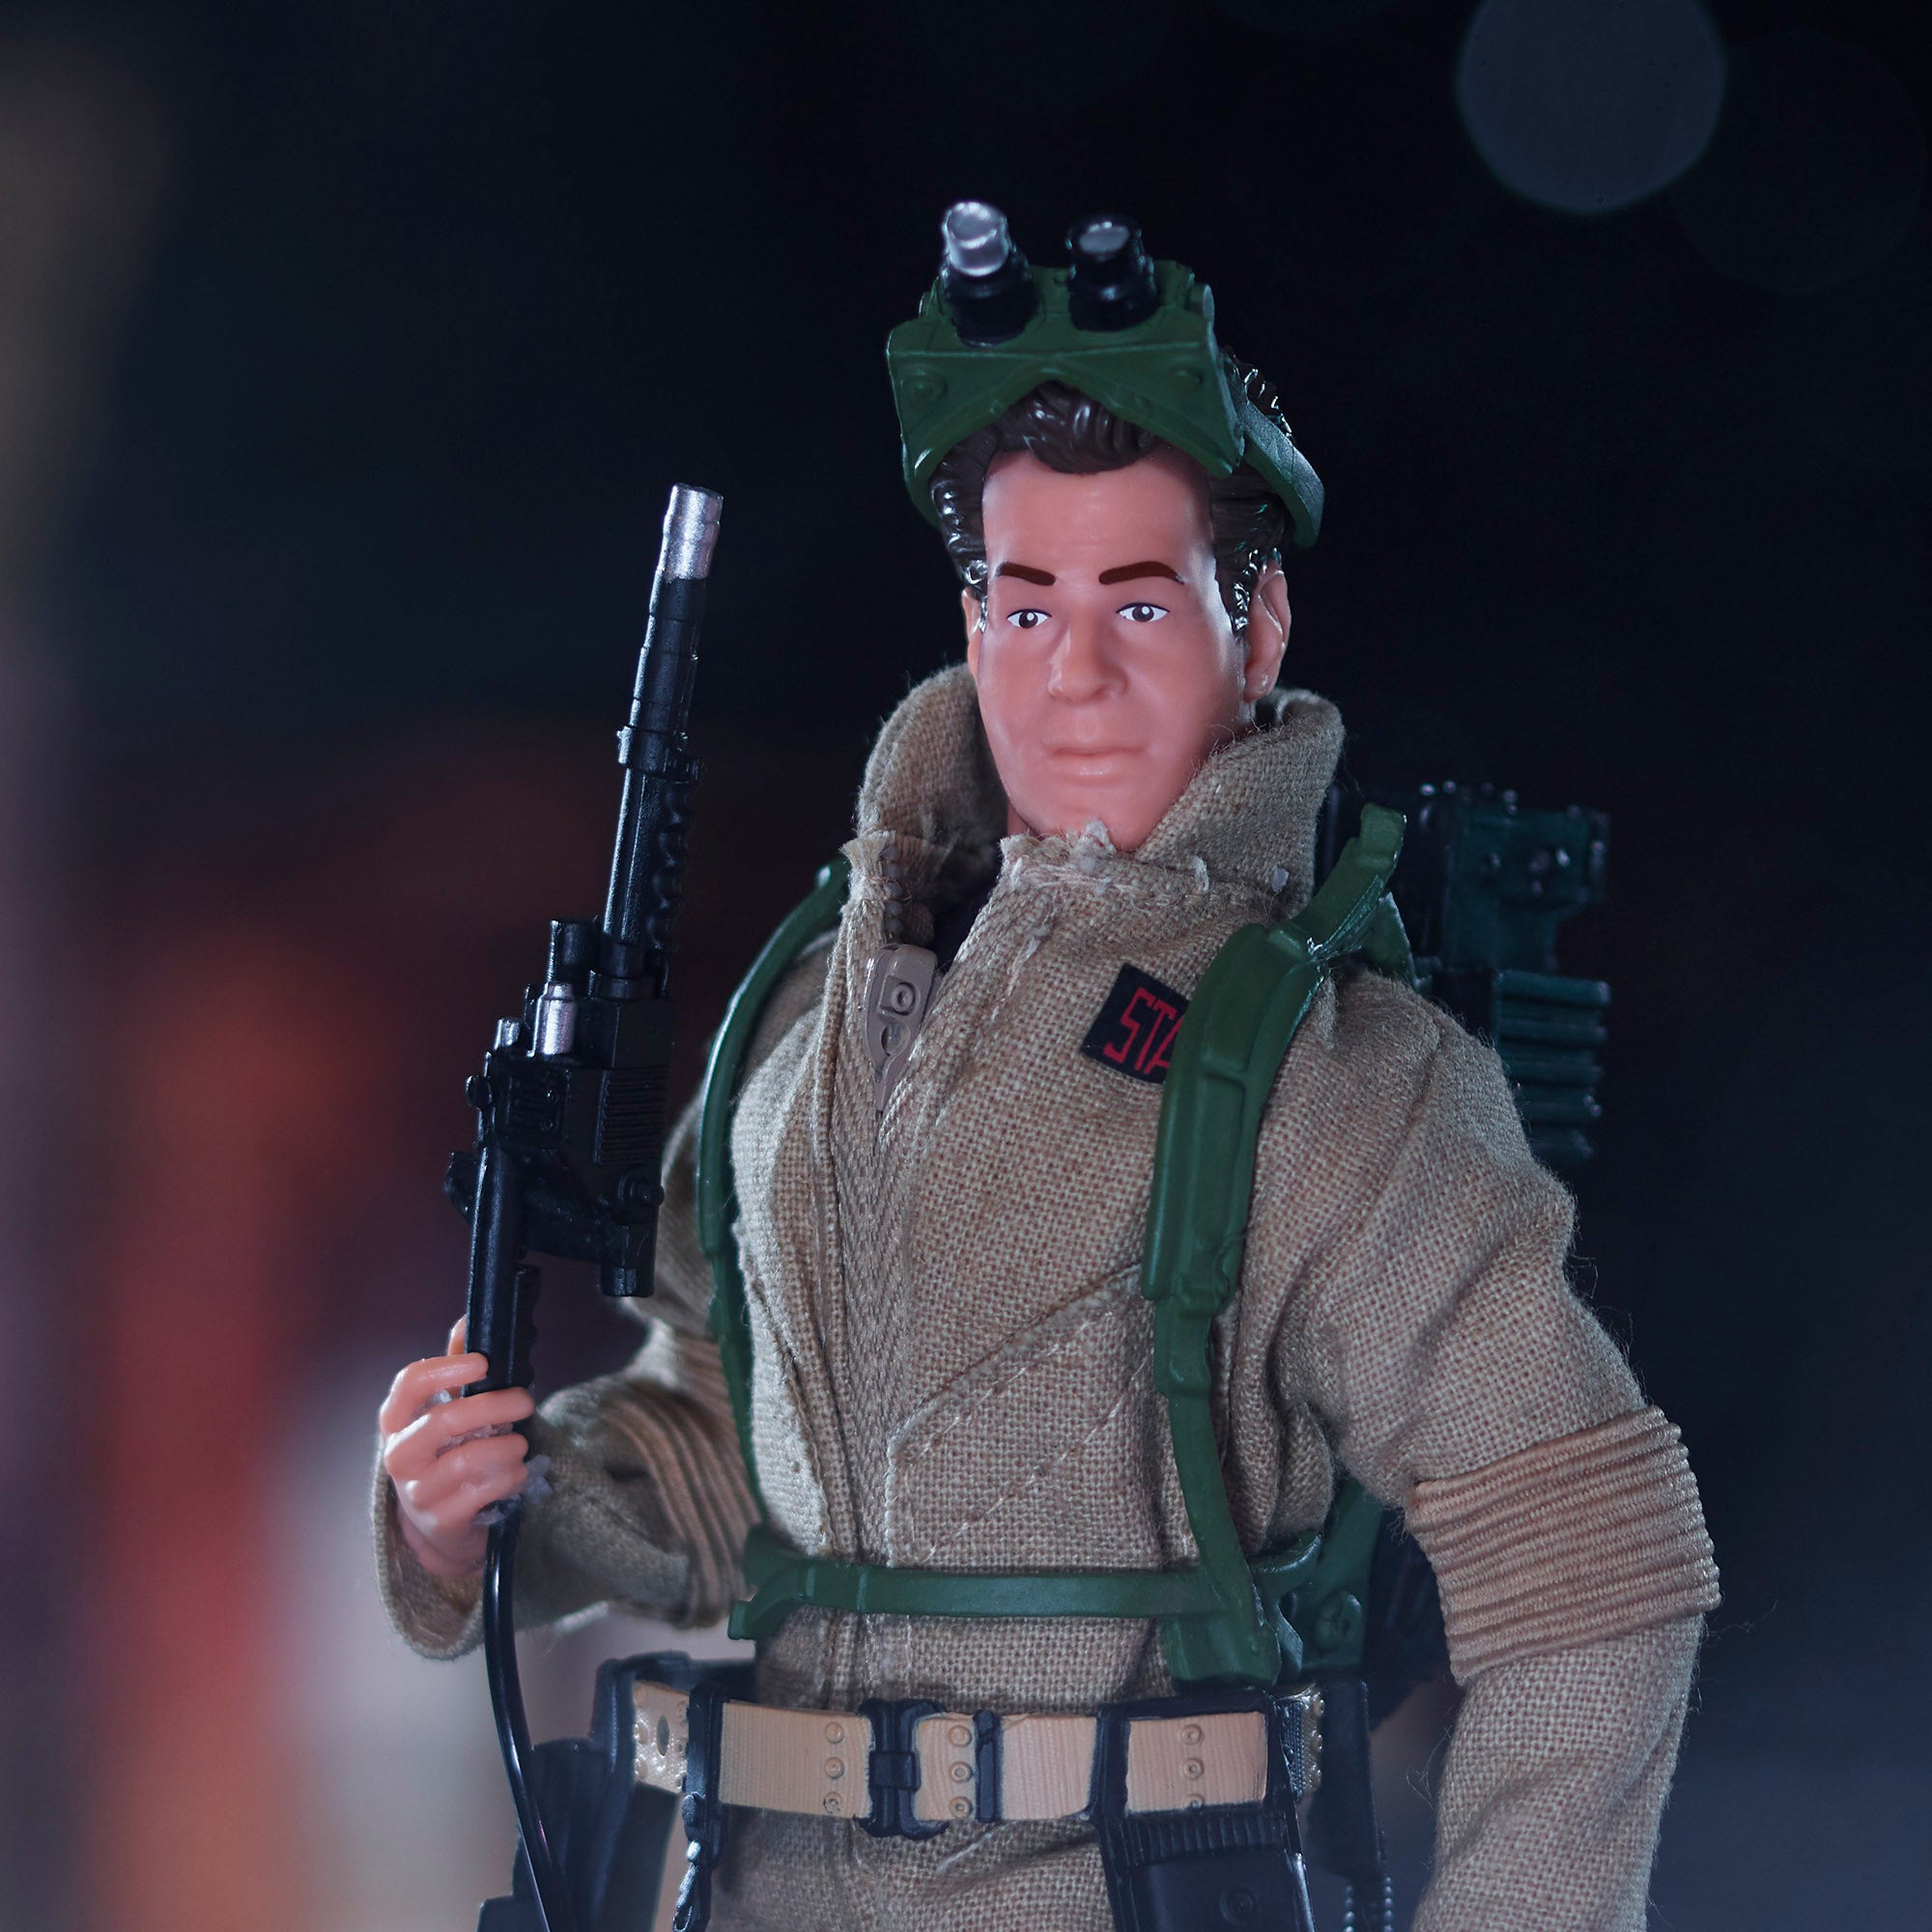 Ghostbusters x Mego 26